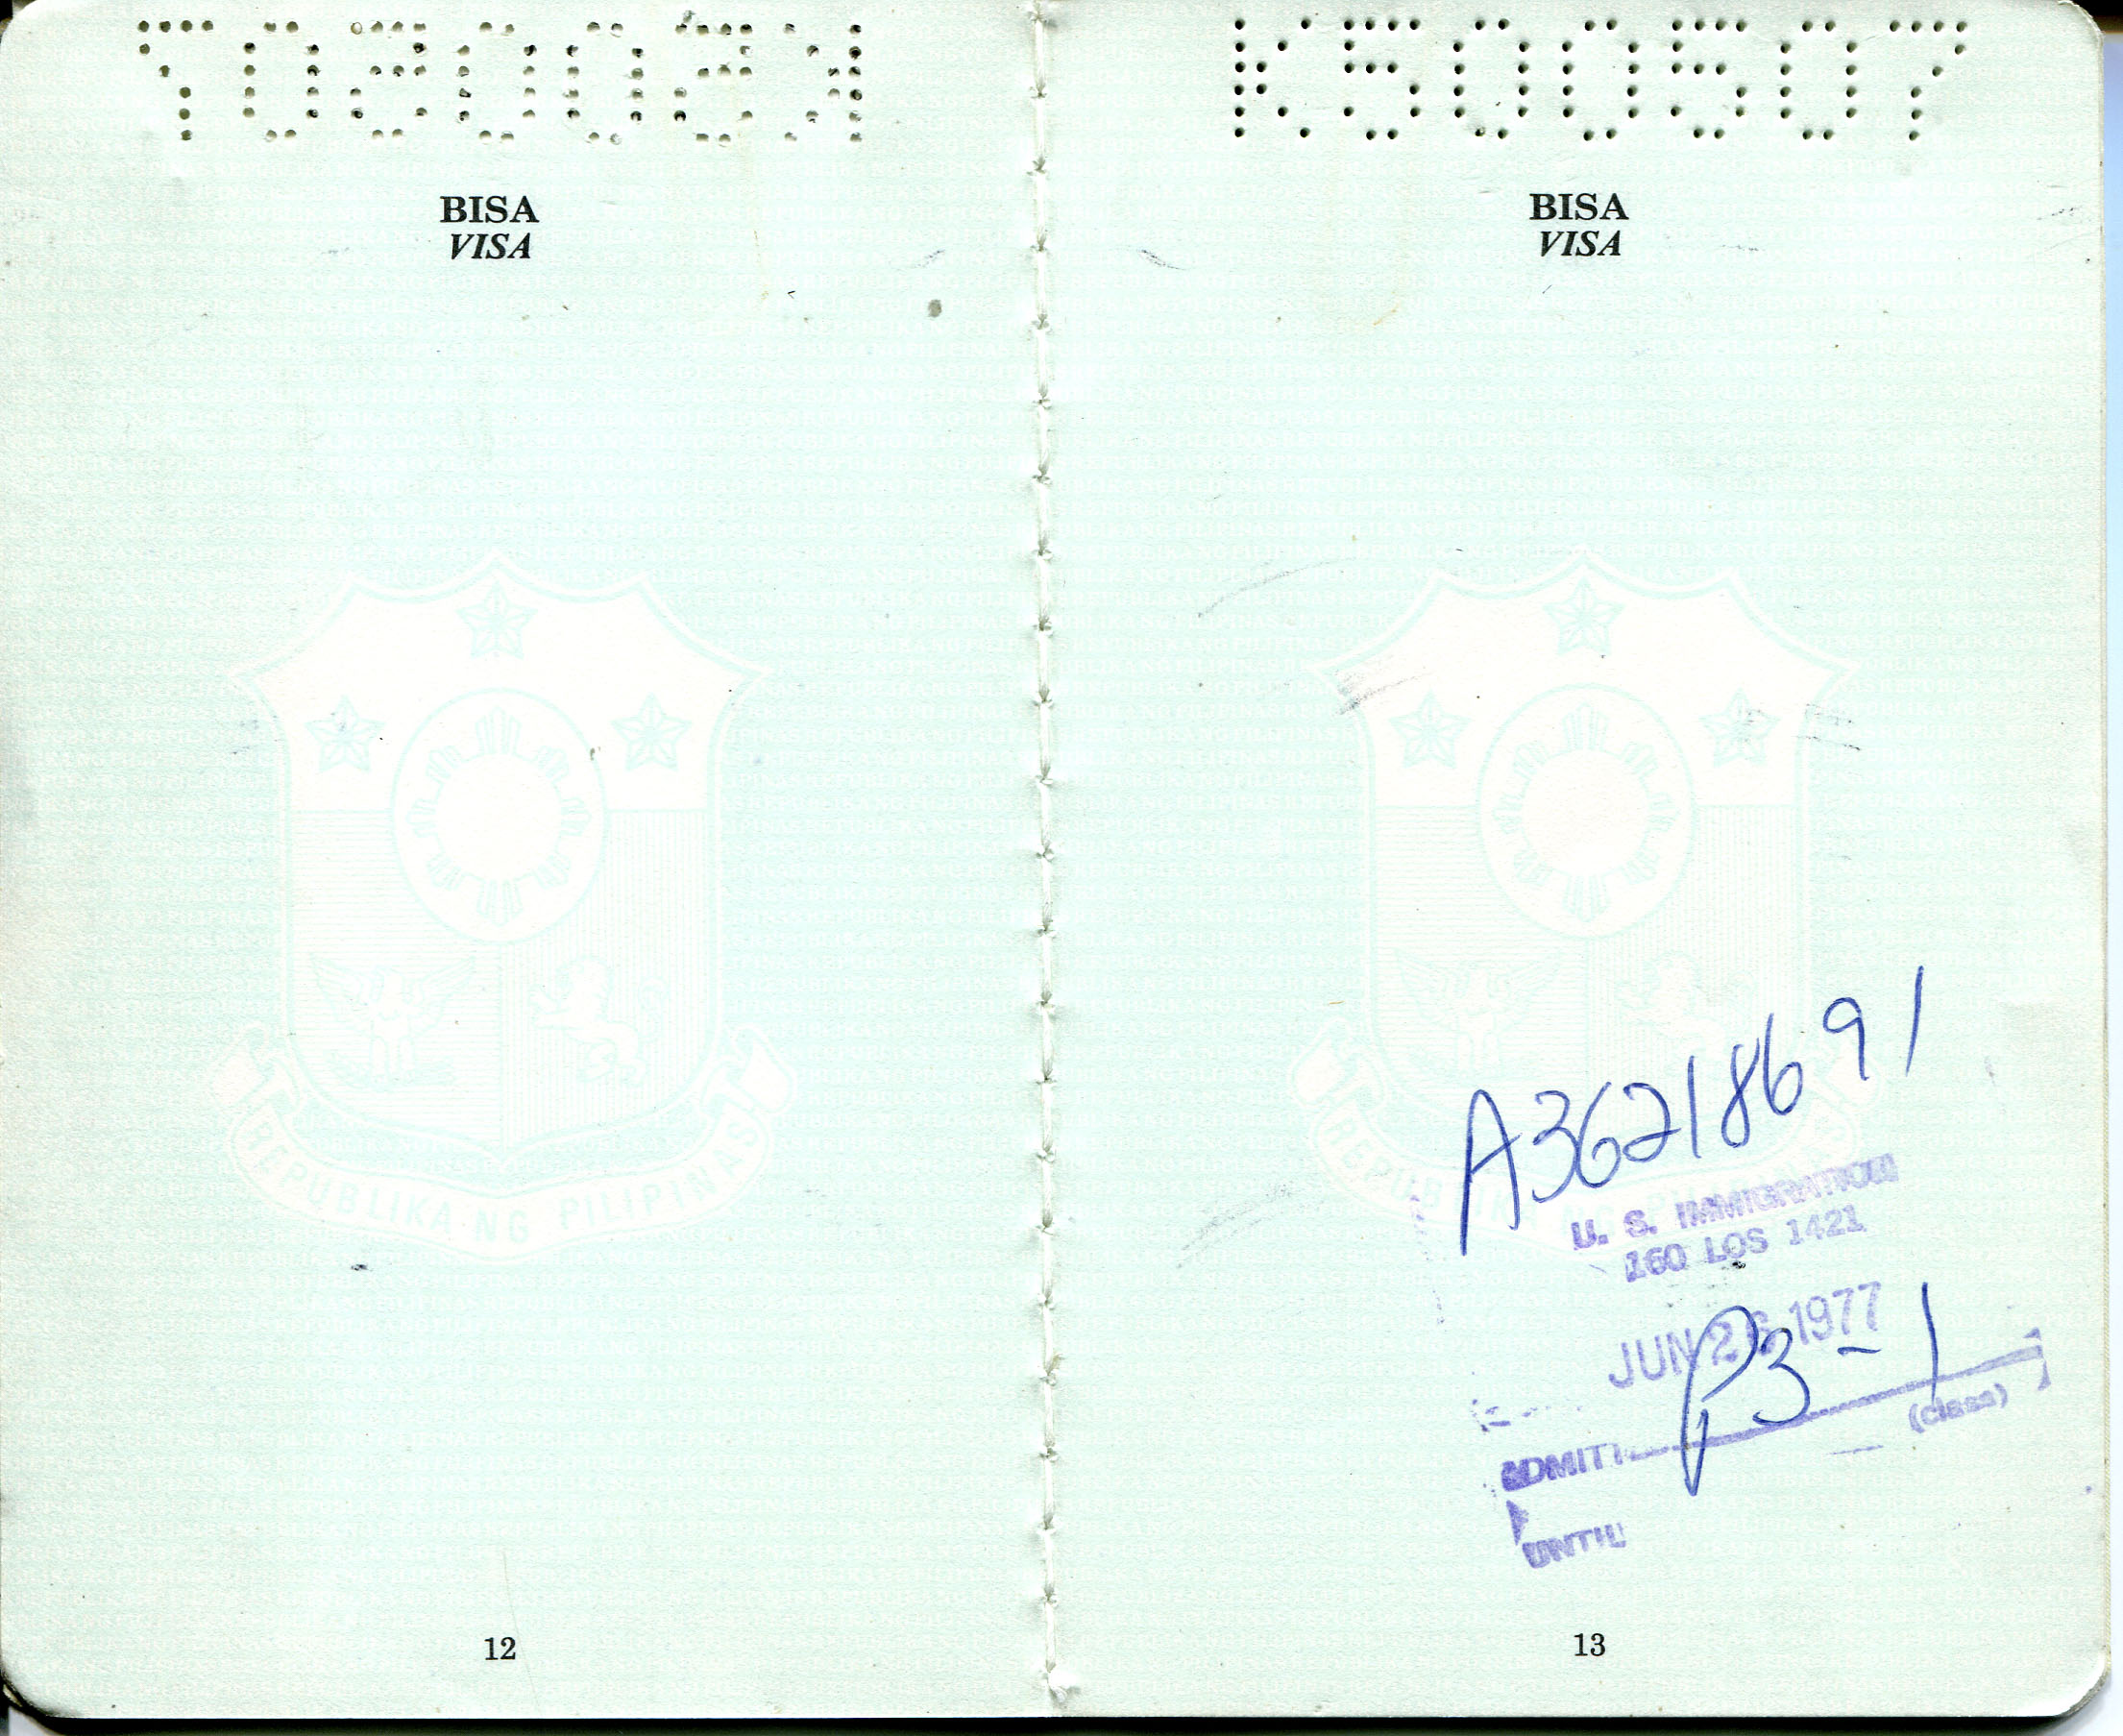 'Scan - Pages 12 and 13 of passport of Etta McKenna.1976 Passport from the Philippine Immigration Office, during process to immigrate to the US.Names of passport pages in Wika Filipino “Pasaporte” and “Republica”Notes from Sarah Carlson, in discussion with McKenna: “First Phil. passport I used when I immigrated to the US in 1977. It reminded me of the months of overtime work in order to afford, prepare and complete all documents needed to come to the US. Without any relatives tosupport me in the US, I had to make sure I had enough to support myself the first few months in the new land until I got a job. The process, even though difficult, is worth remembering.” Any views, findings, conclusions, or recommendations expressed in this story do not necessarily represent those of the National Endowment for the Humanities. (c) Field Museum of Natural History - CC BY-NC 4.0